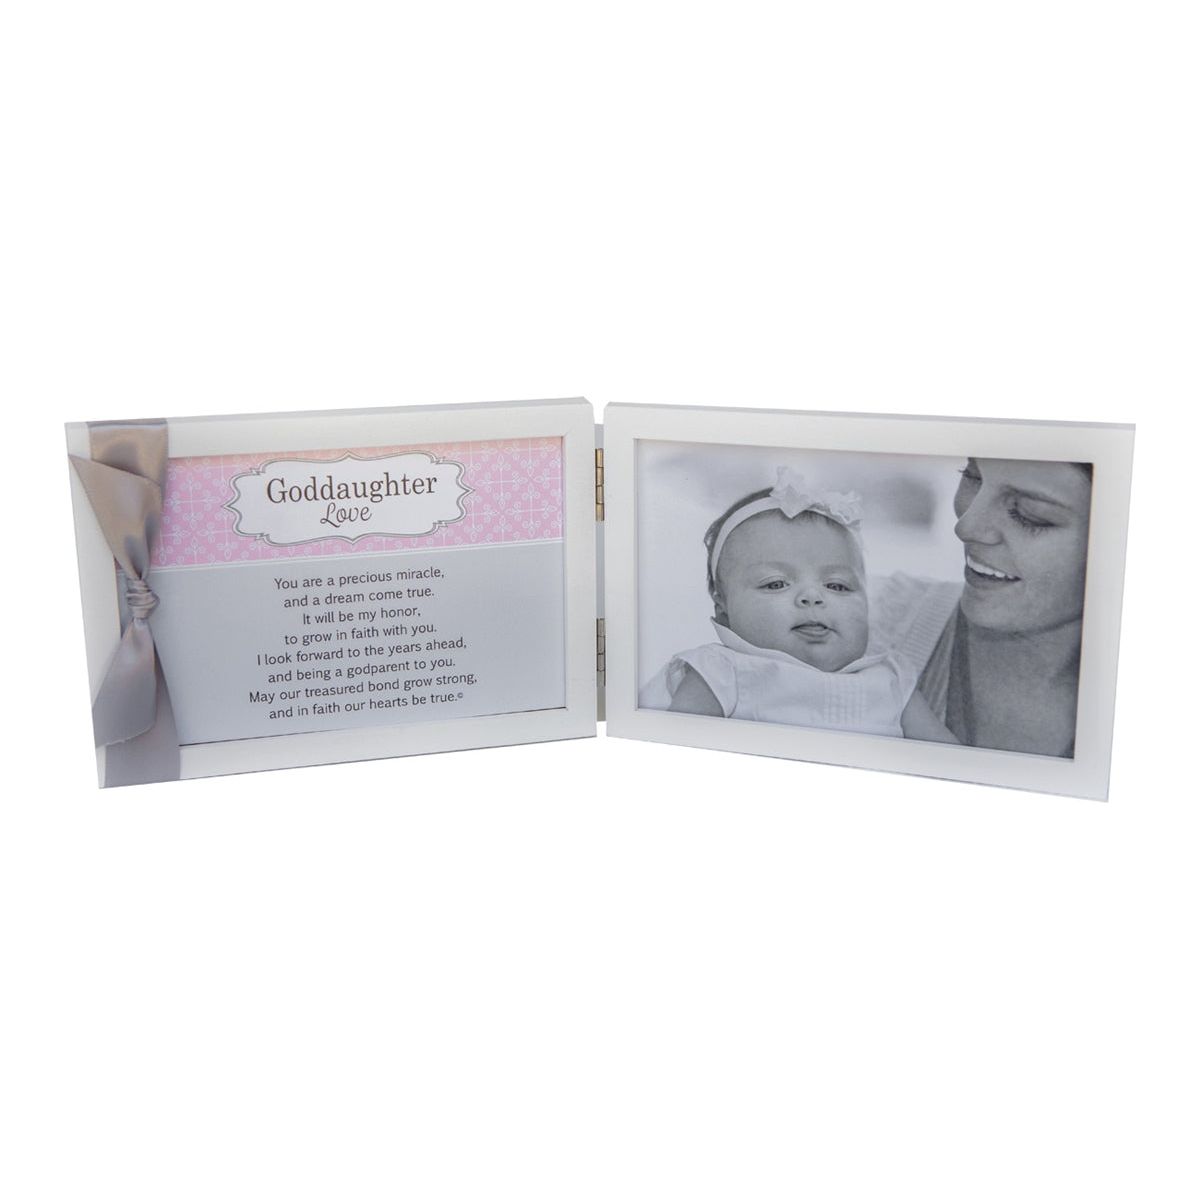 Precious Goddaughter Picture Frame 4x6